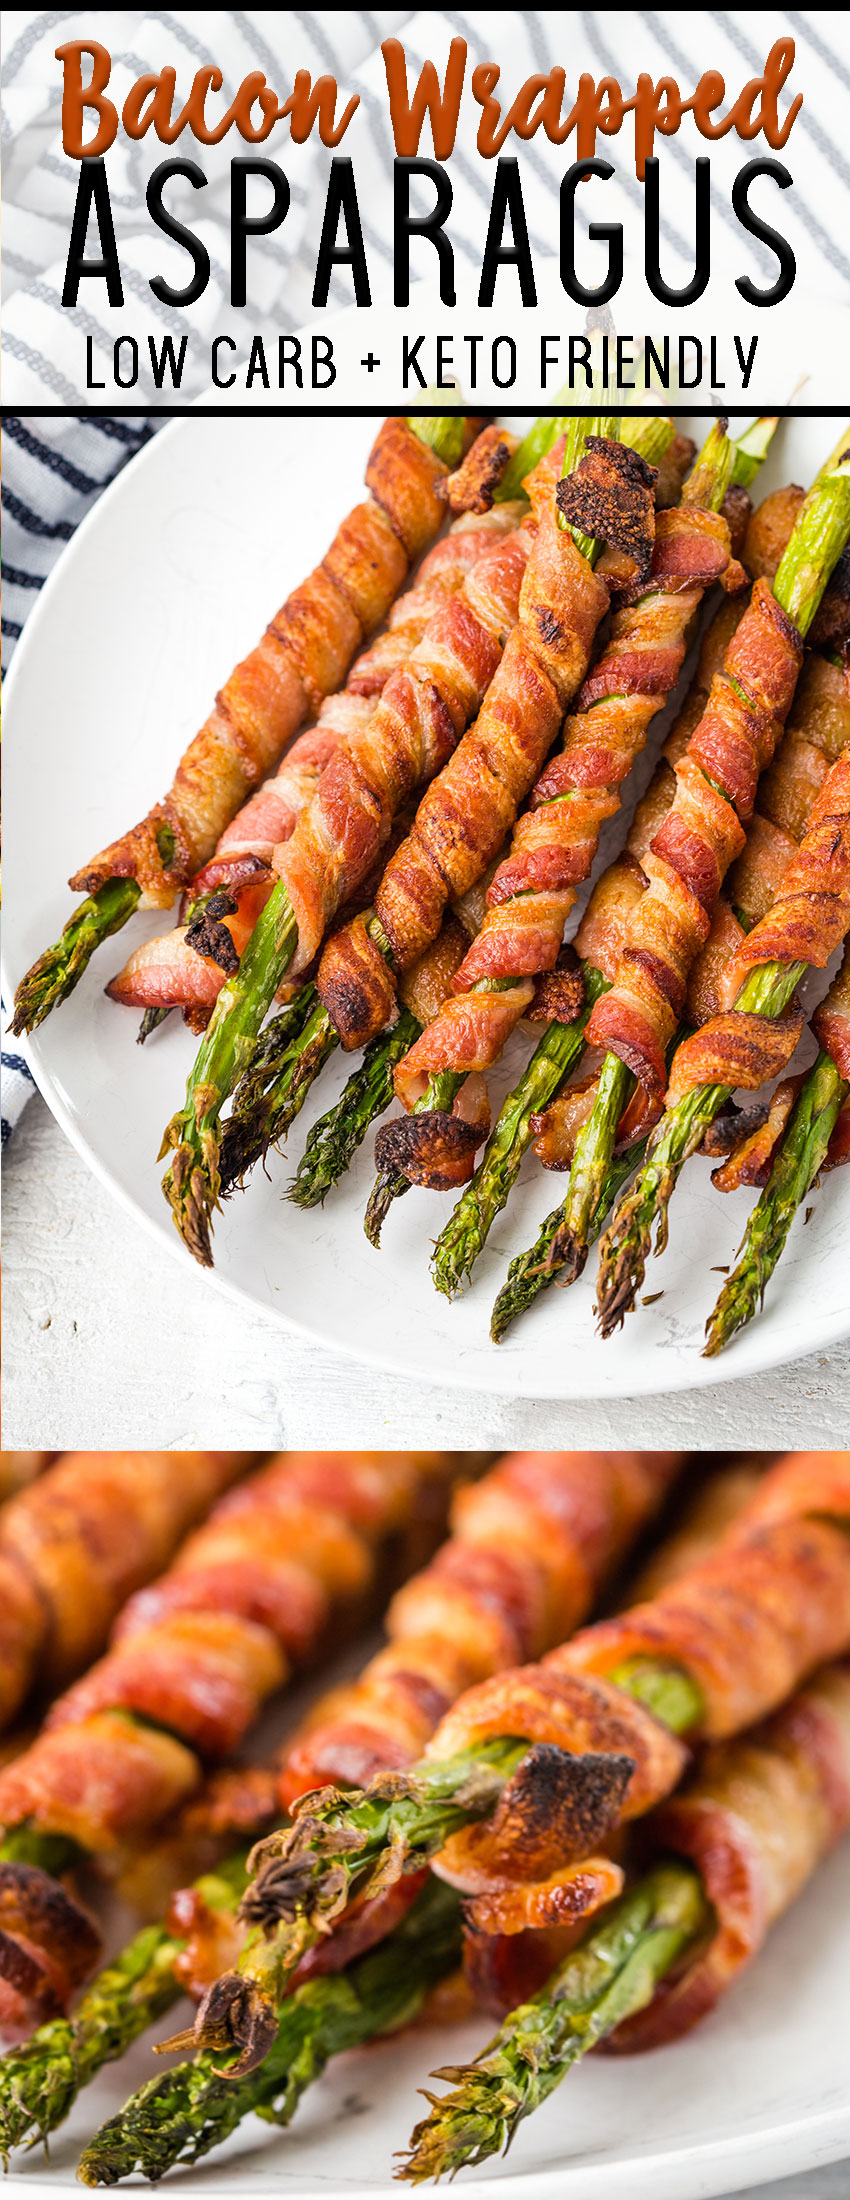 How to make bacon wrapped asparagus perfect for the keto diet